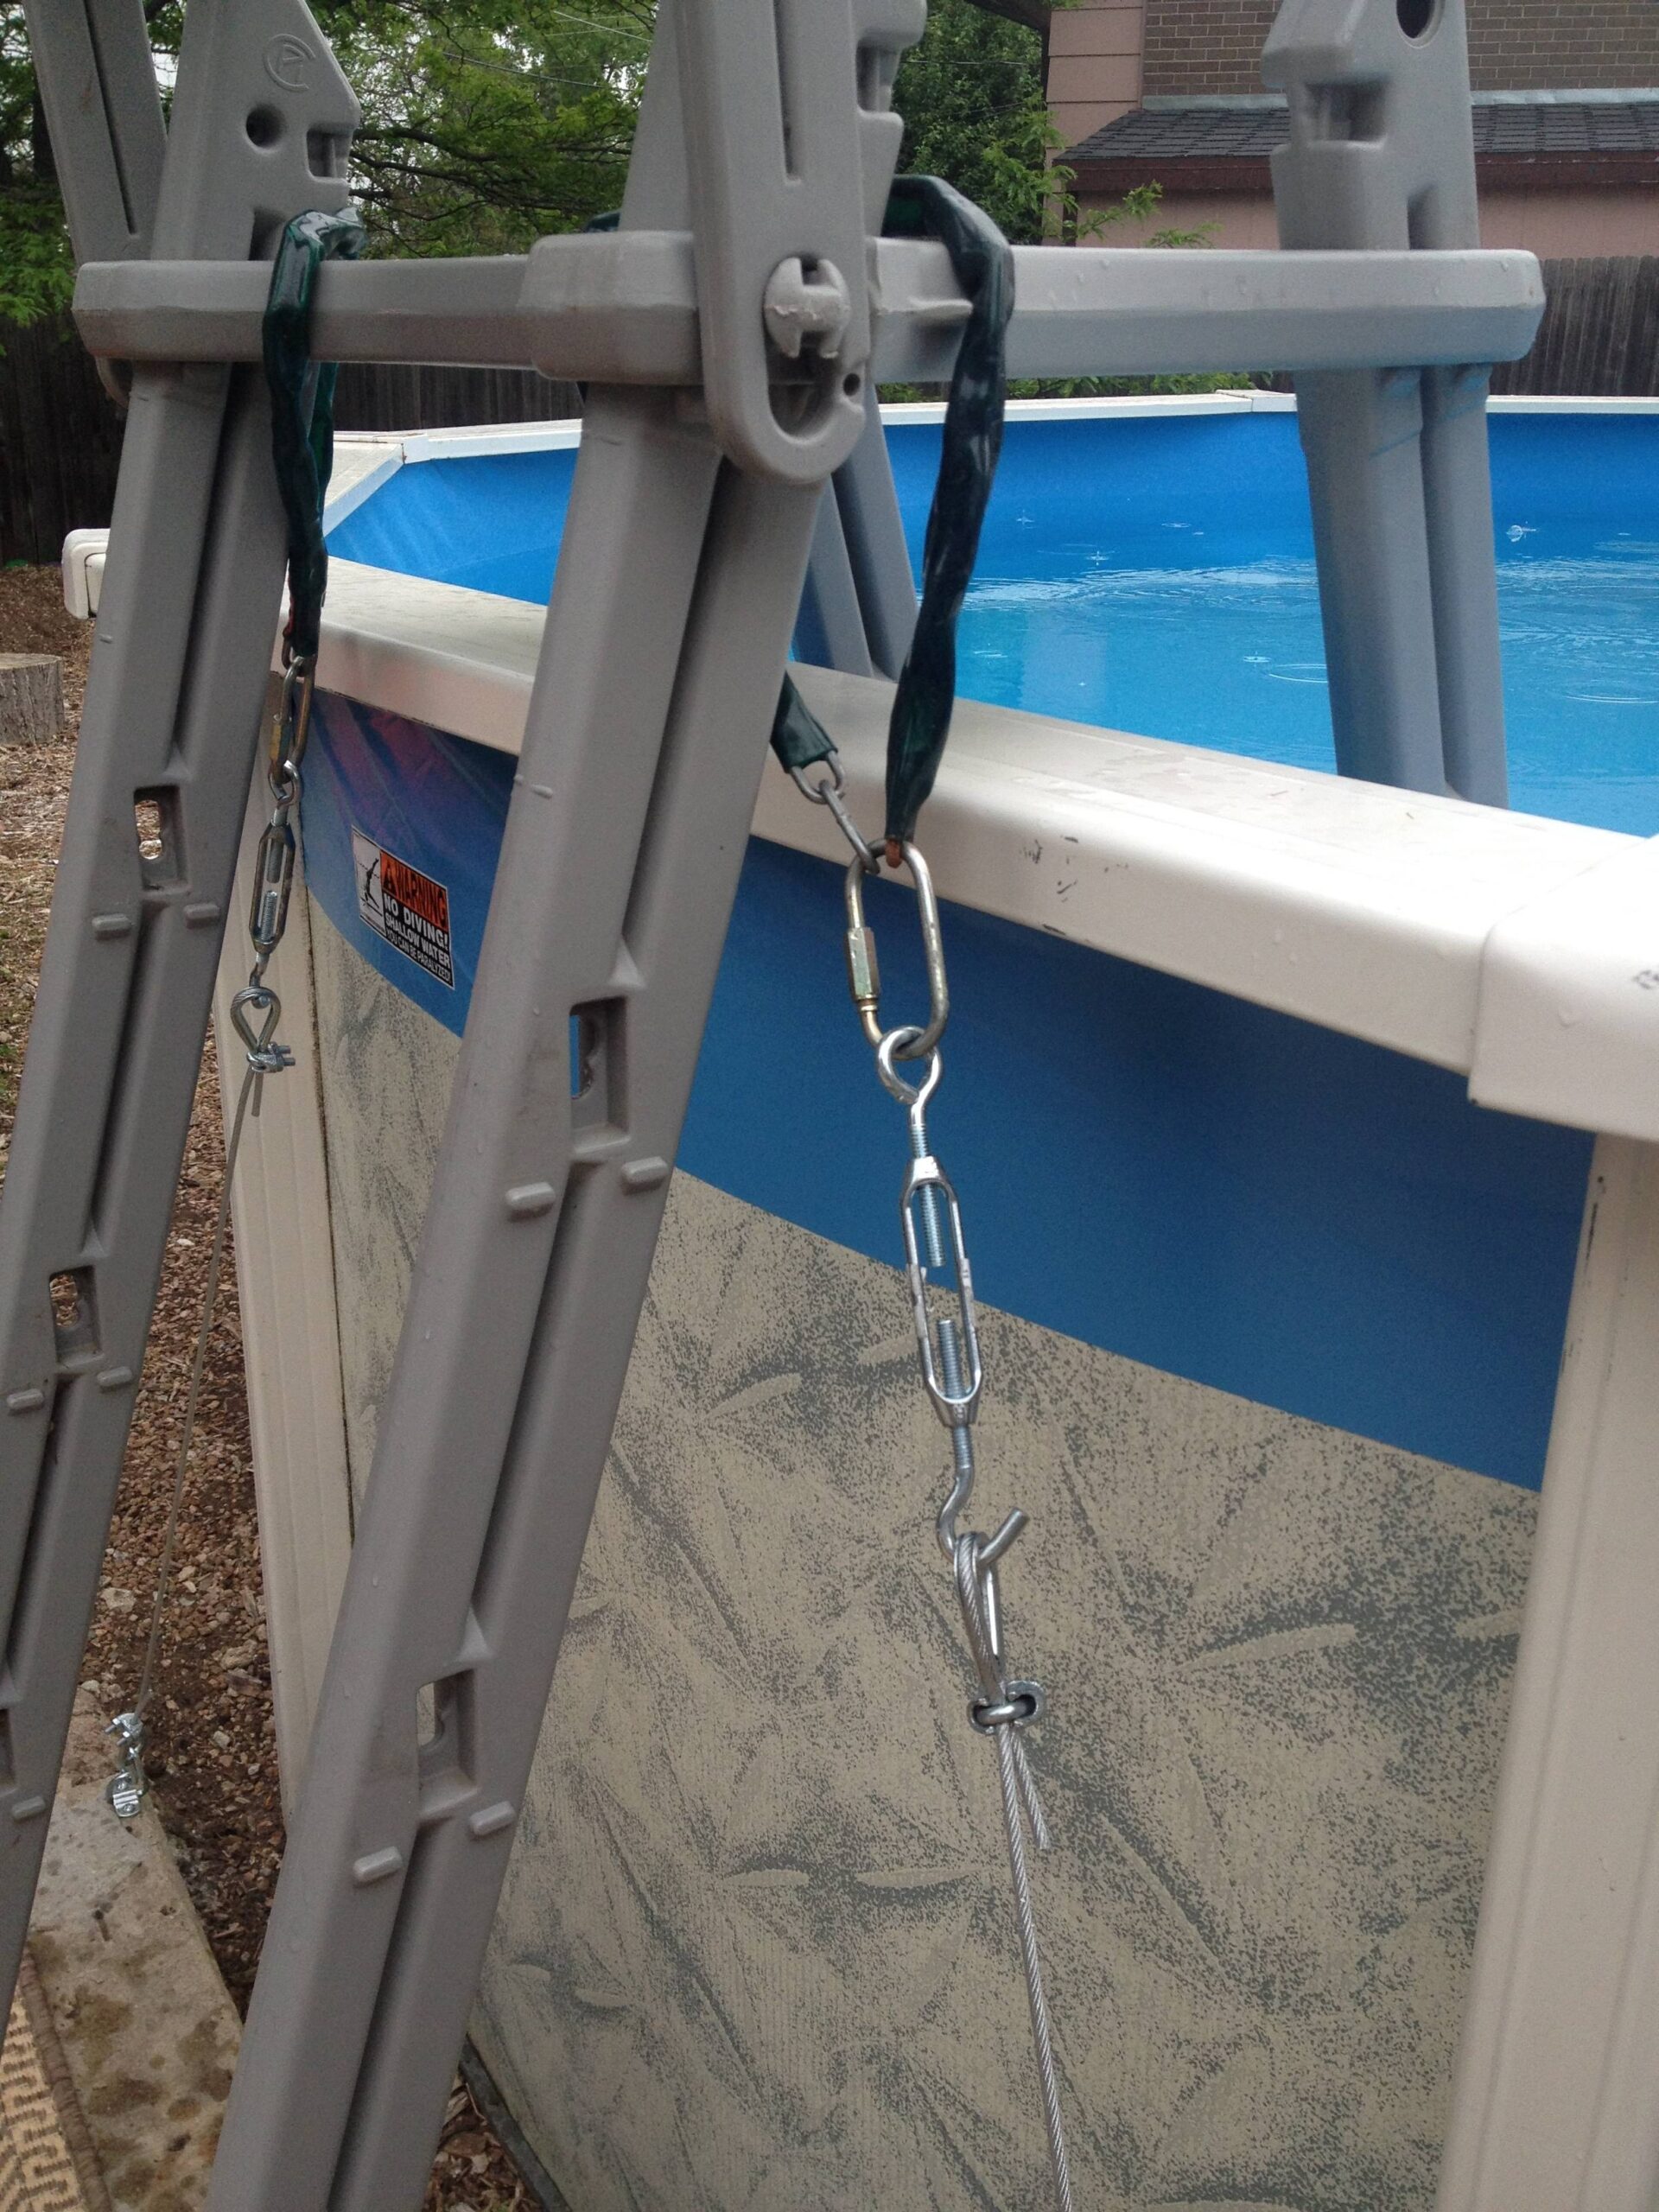 How to Make Pool Ladder Stable